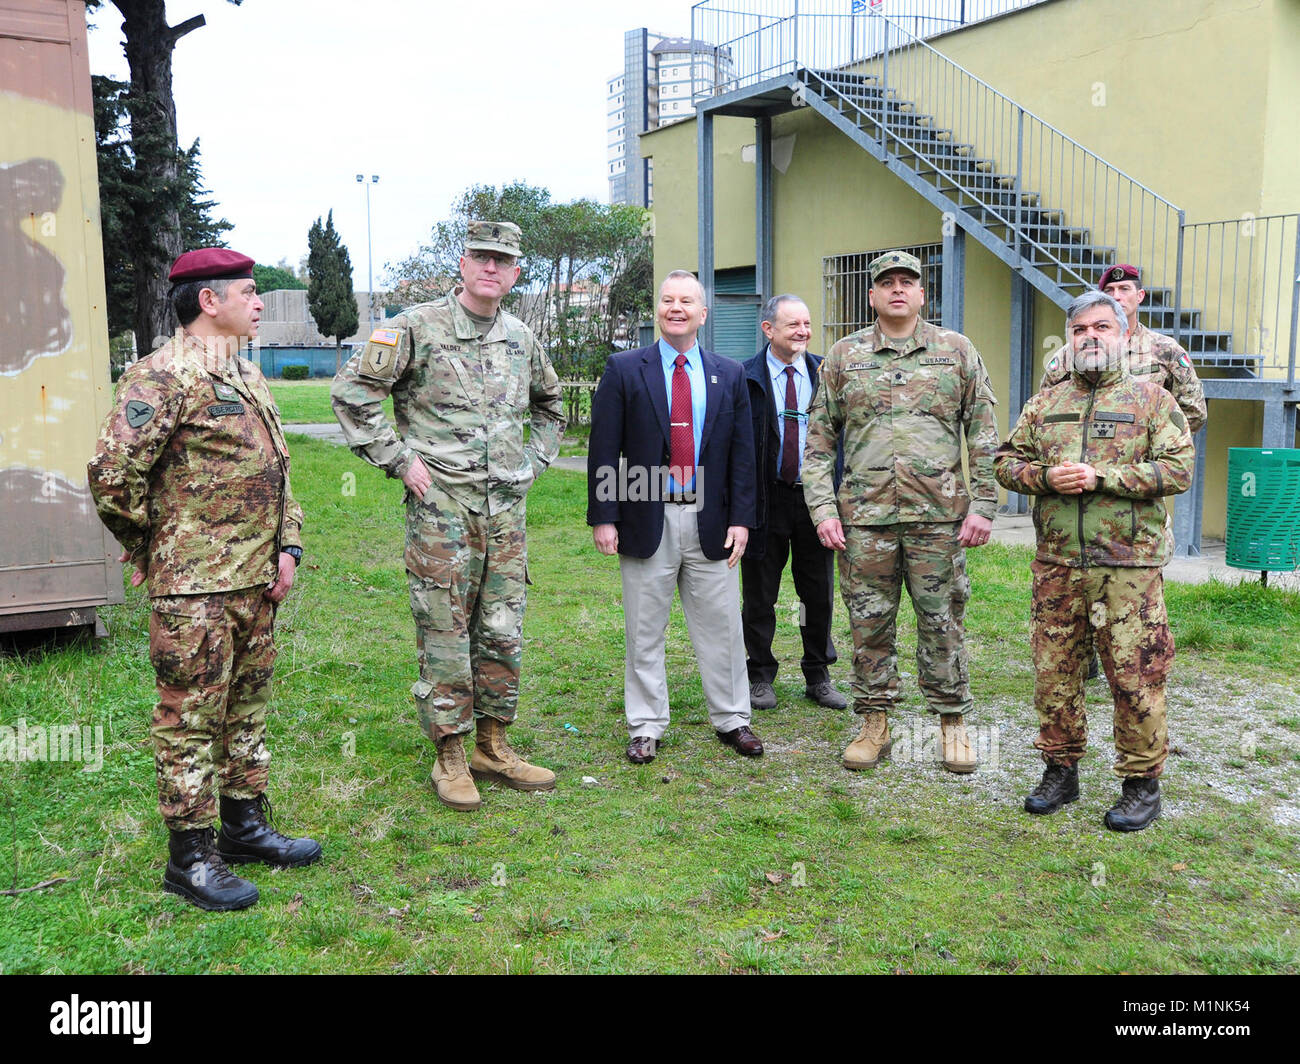 (From left) 1 Mar LGT Giuseppe Tringale, Folgore (ABN) Brigade Headquarters Plans Noncommissioned Officer, Sgt. Maj. Anthony R. Valdez, 7 Army Training Command G-3 Sergeant Major, James V. Matheson, Chief Regional Training Support Division South, 7th Army Training Command, Ivano Trevisanutto, Chief Training Support Center Italy, 7th Army Training Command, Lt. Col. Ismael B. Natividad, Training Support Activity Europe (TSAE) Director, Col. Marco Becherini, Folgore (ABN) Brigade Training Center Commander, visit Lustrissimi Training Area, Livorno, Italy, Jan 30, 2018.( Stock Photo